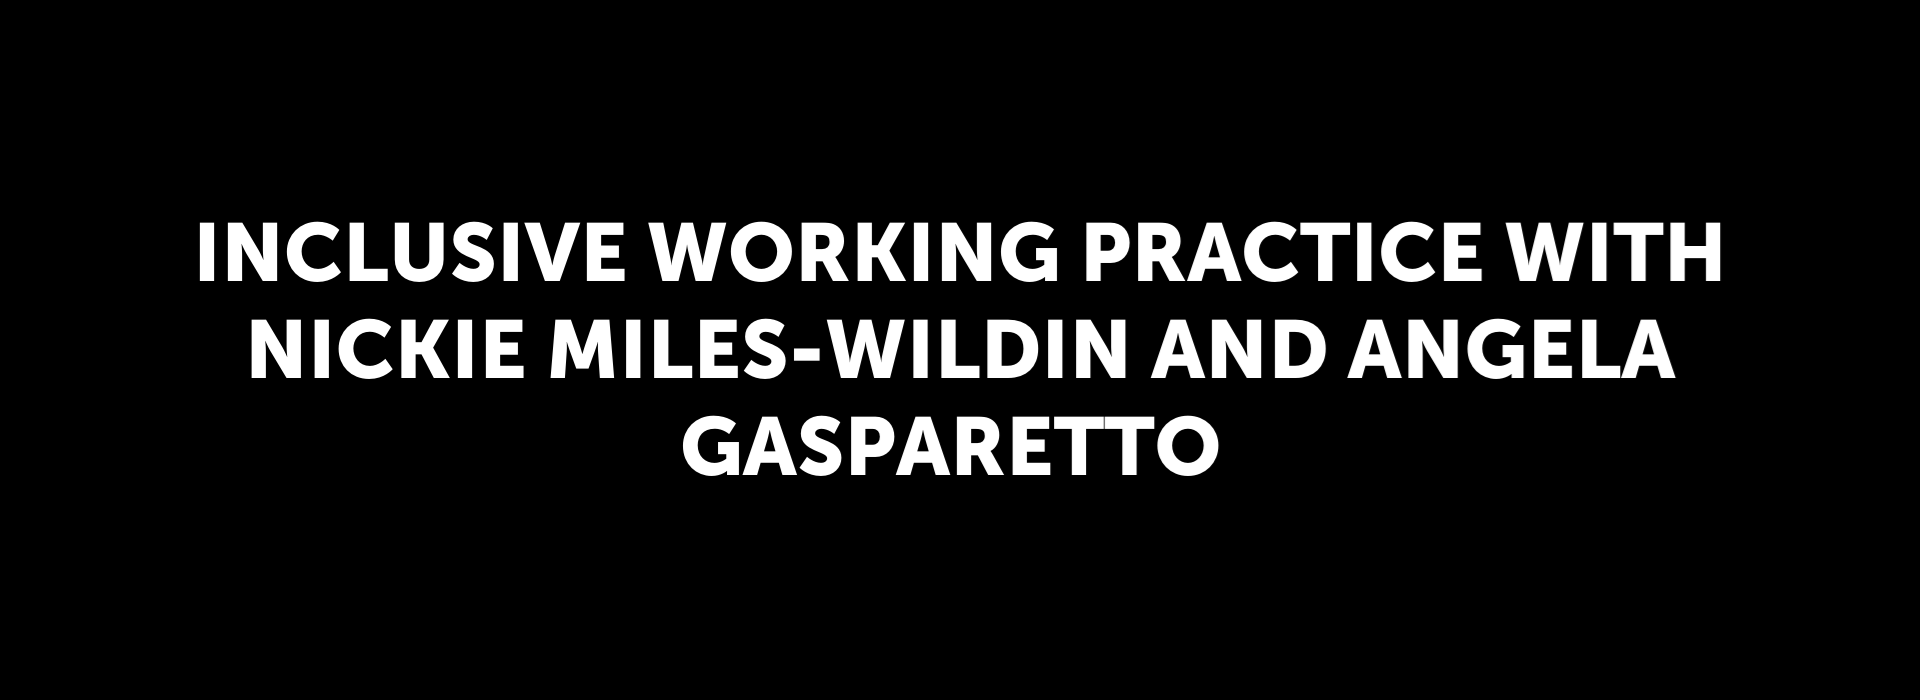 Inclusive Working Practice with Nickie Miles-Wildin and Angela Gasparetto